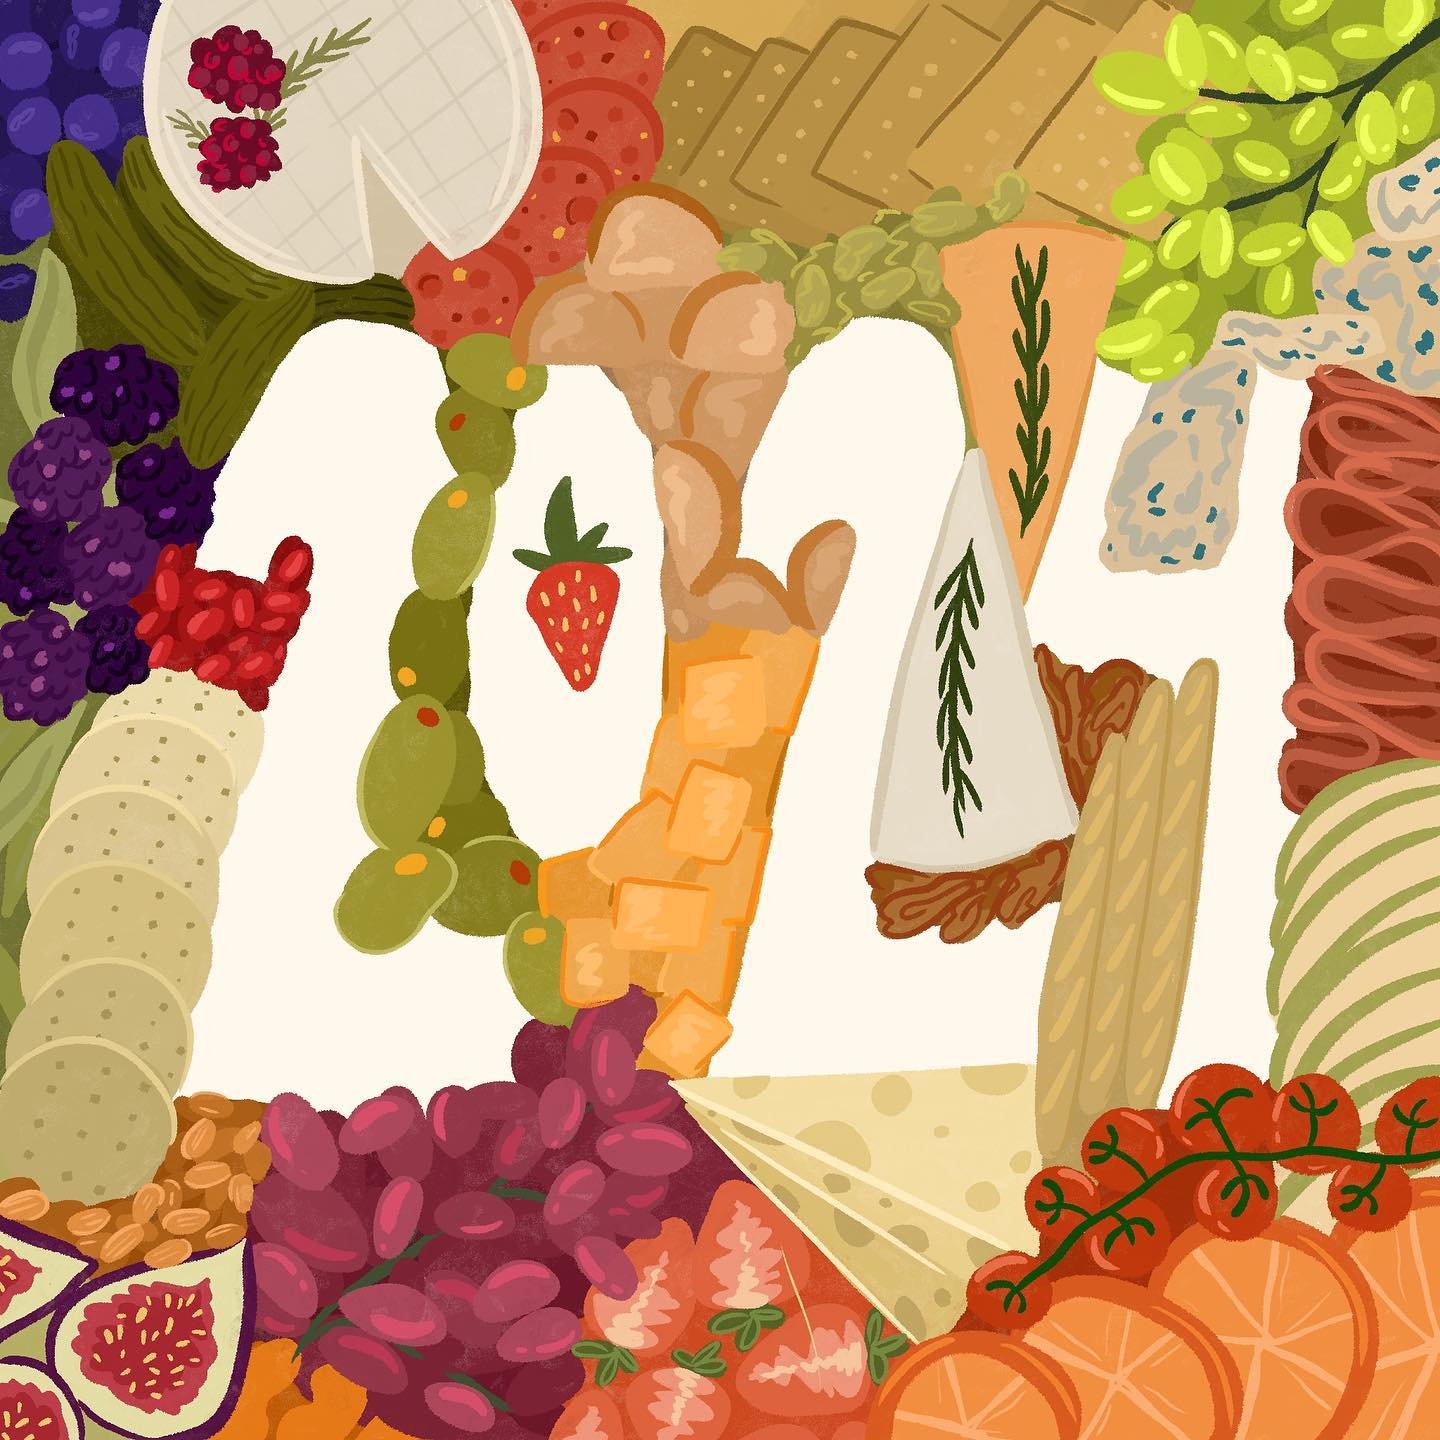 here&rsquo;s to a happy and creative 2024! (hopefully with lots of charcuterie boards)

#art #illustration #illustrationartists #illustrationartists #foodillustrator #foodillustration #2024 #newyear #artist #digitalart #digitalpainting #digitalillust